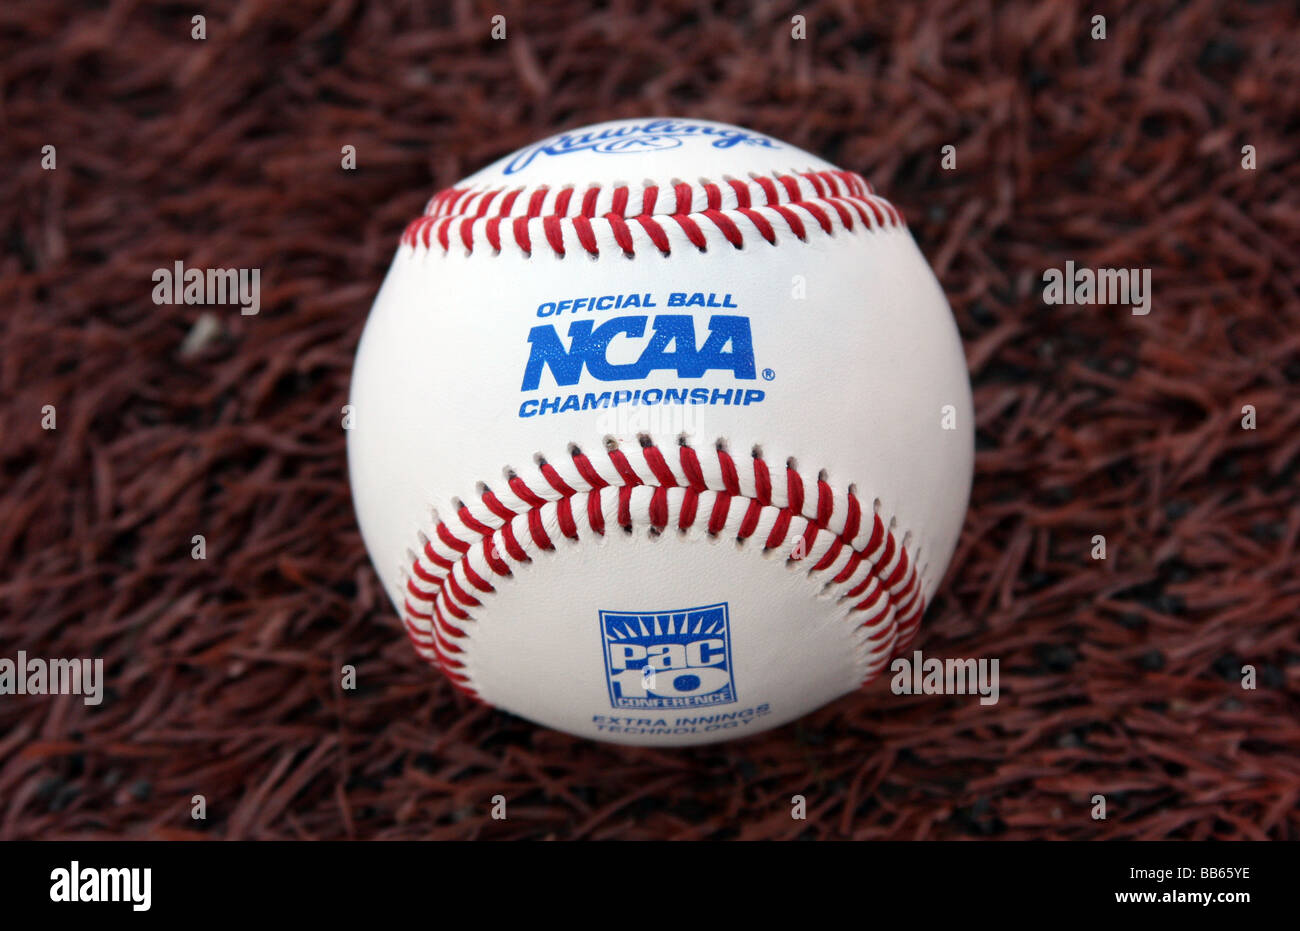 Official NCAA game baseball from the Washington State vs. Stanford baseball game in the Pac-10 conference from the 2009 season. Stock Photo